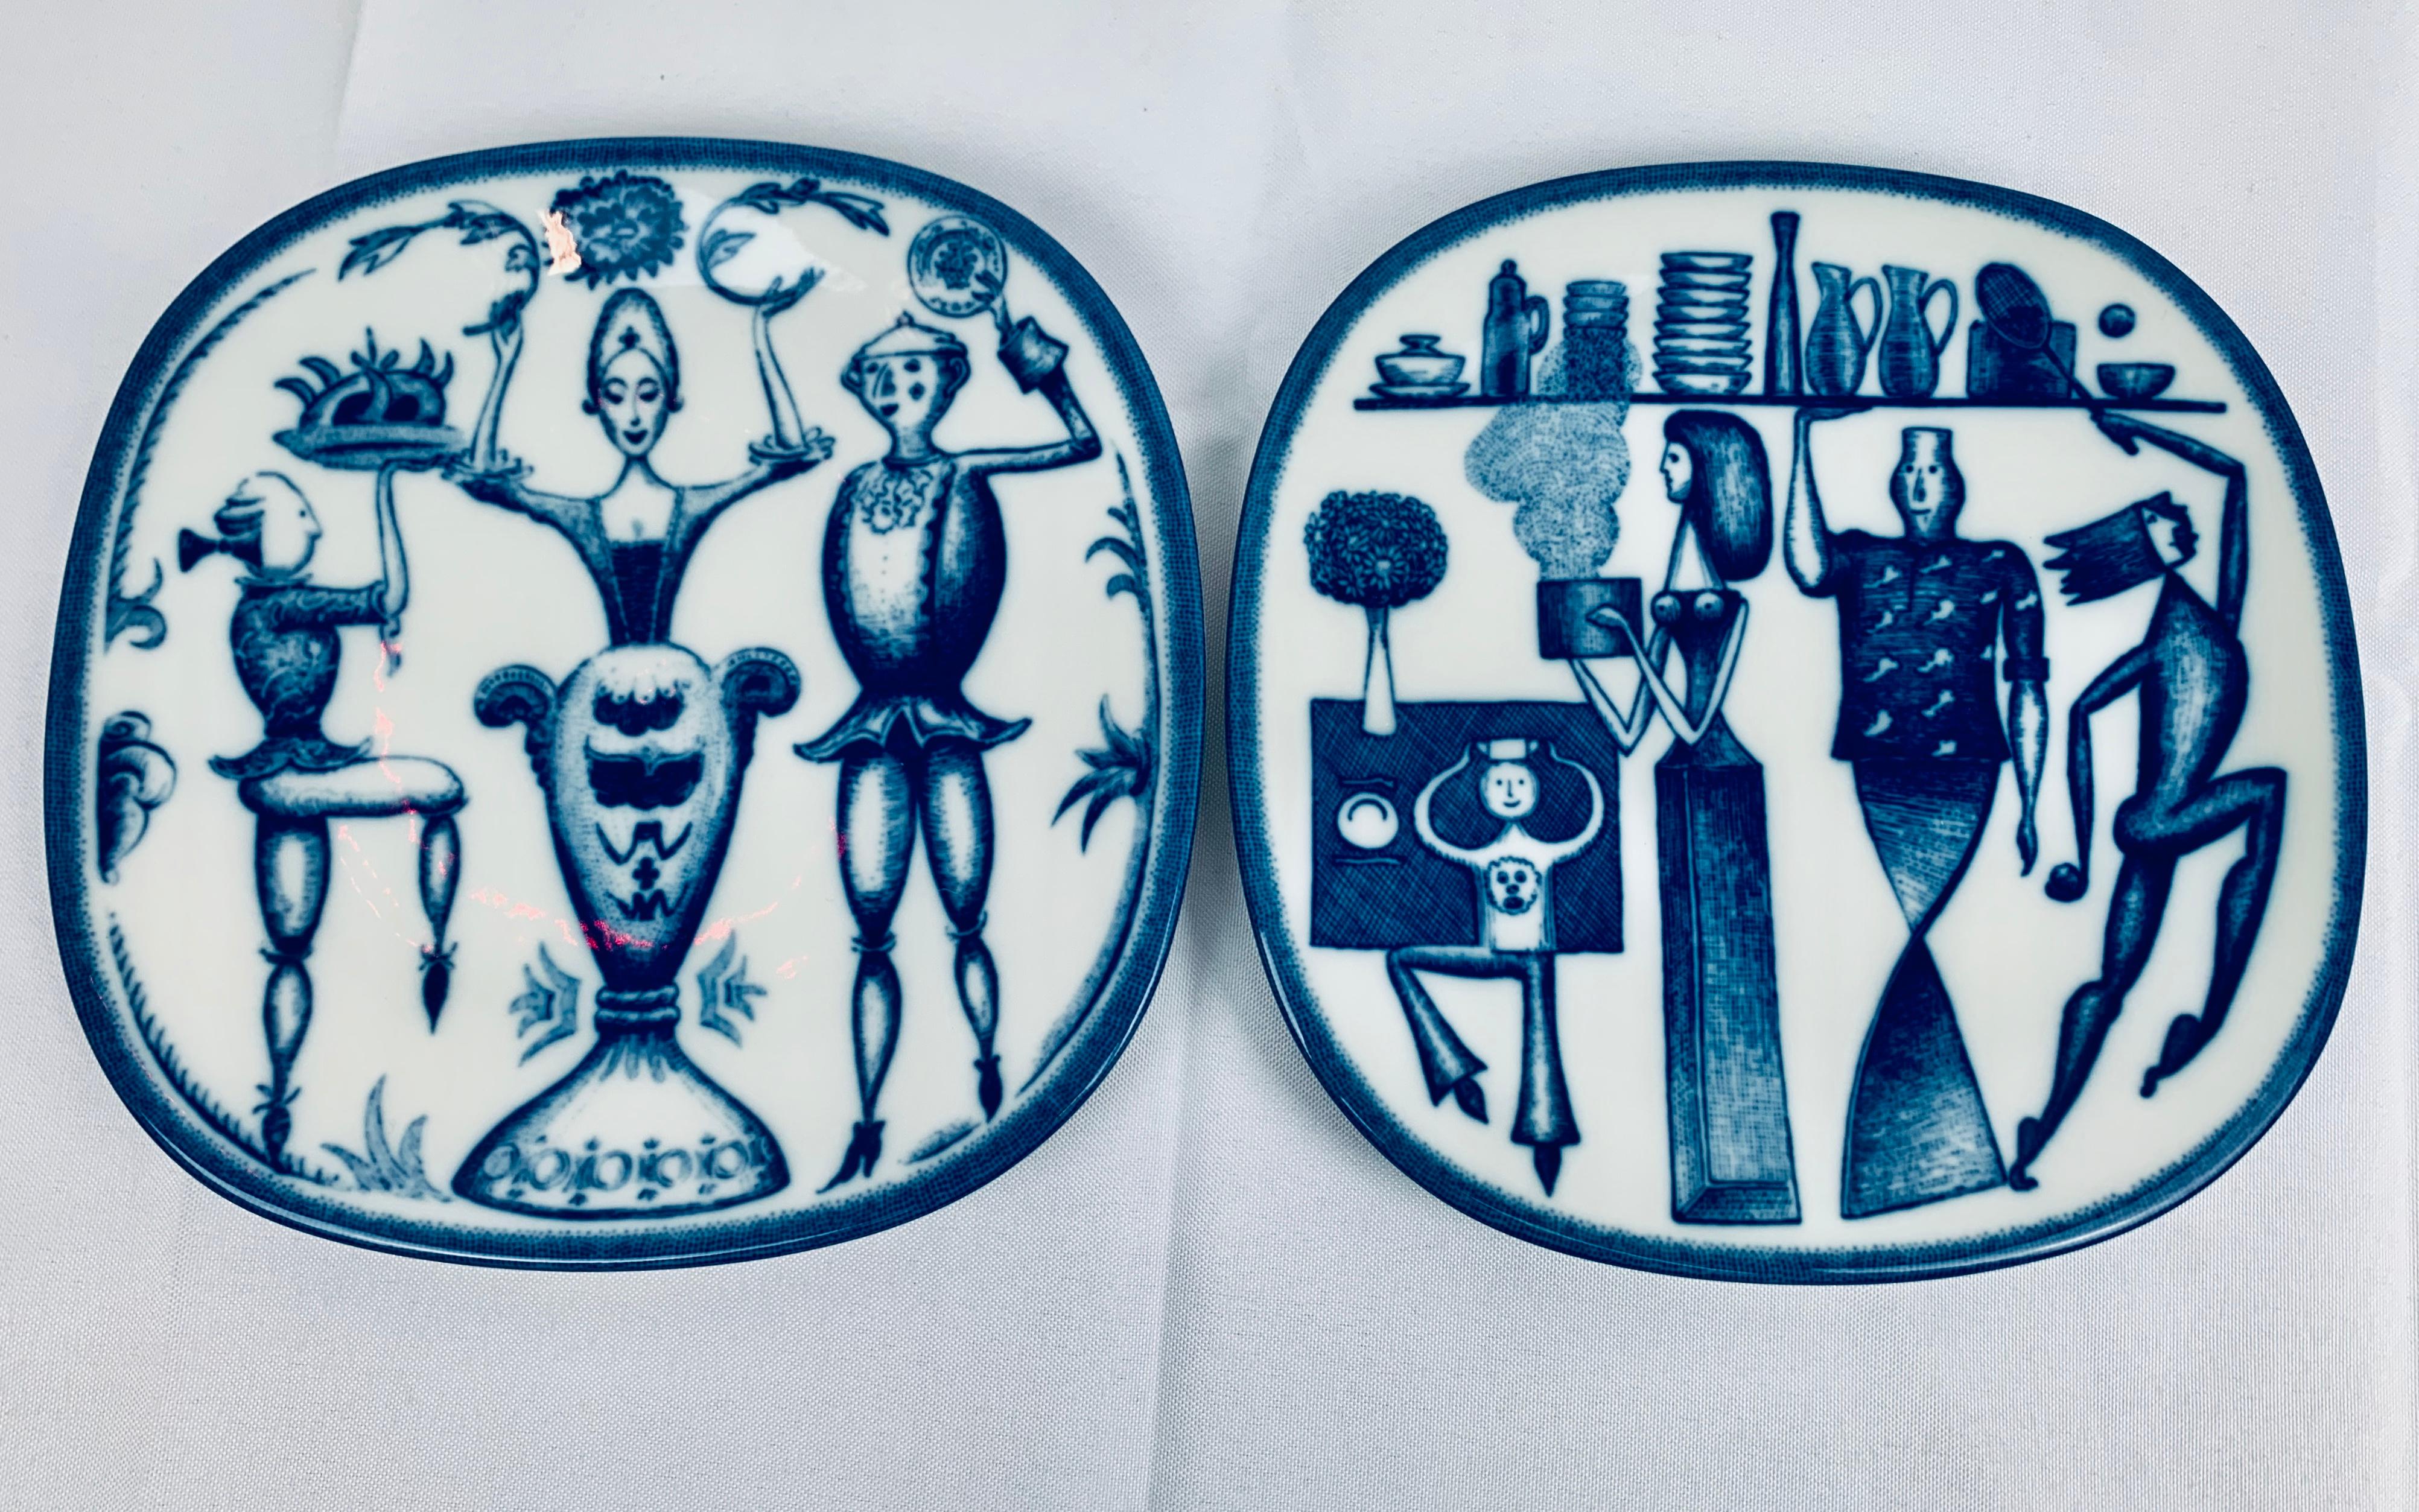 Pair of Rörstrand porcelain commemorative plates decorated in an underglaze cobalt blue coloration. These plates were designed by Niels-Christian Hald, a Swedish illustrator, (born 1933 in Orrefors) for the 250th anniverswary of the company from